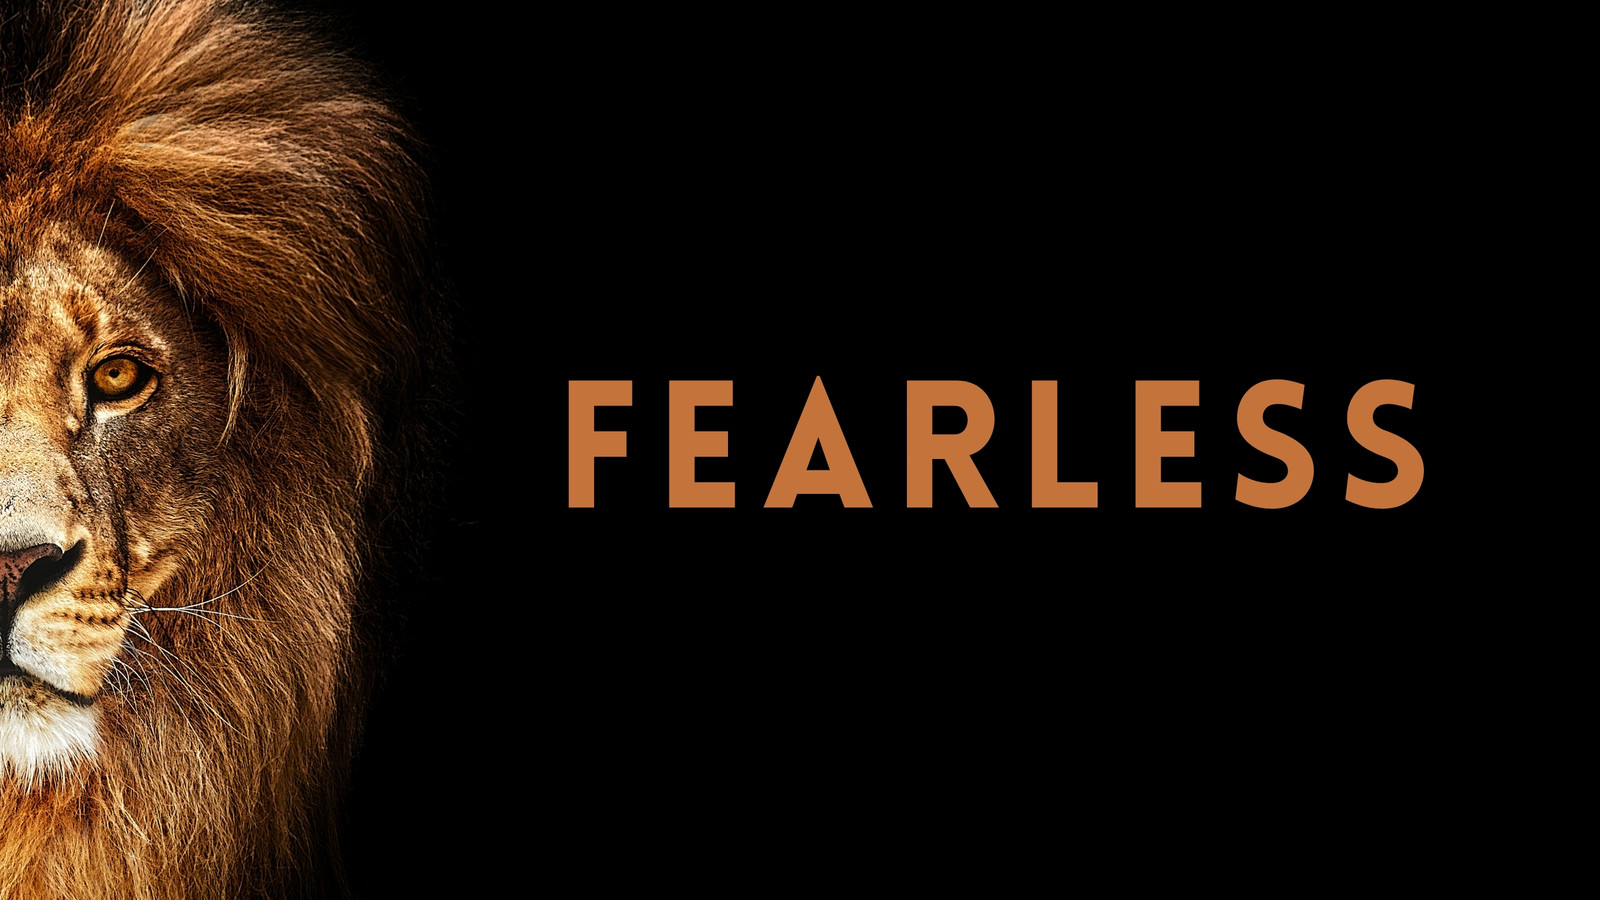 fearless background